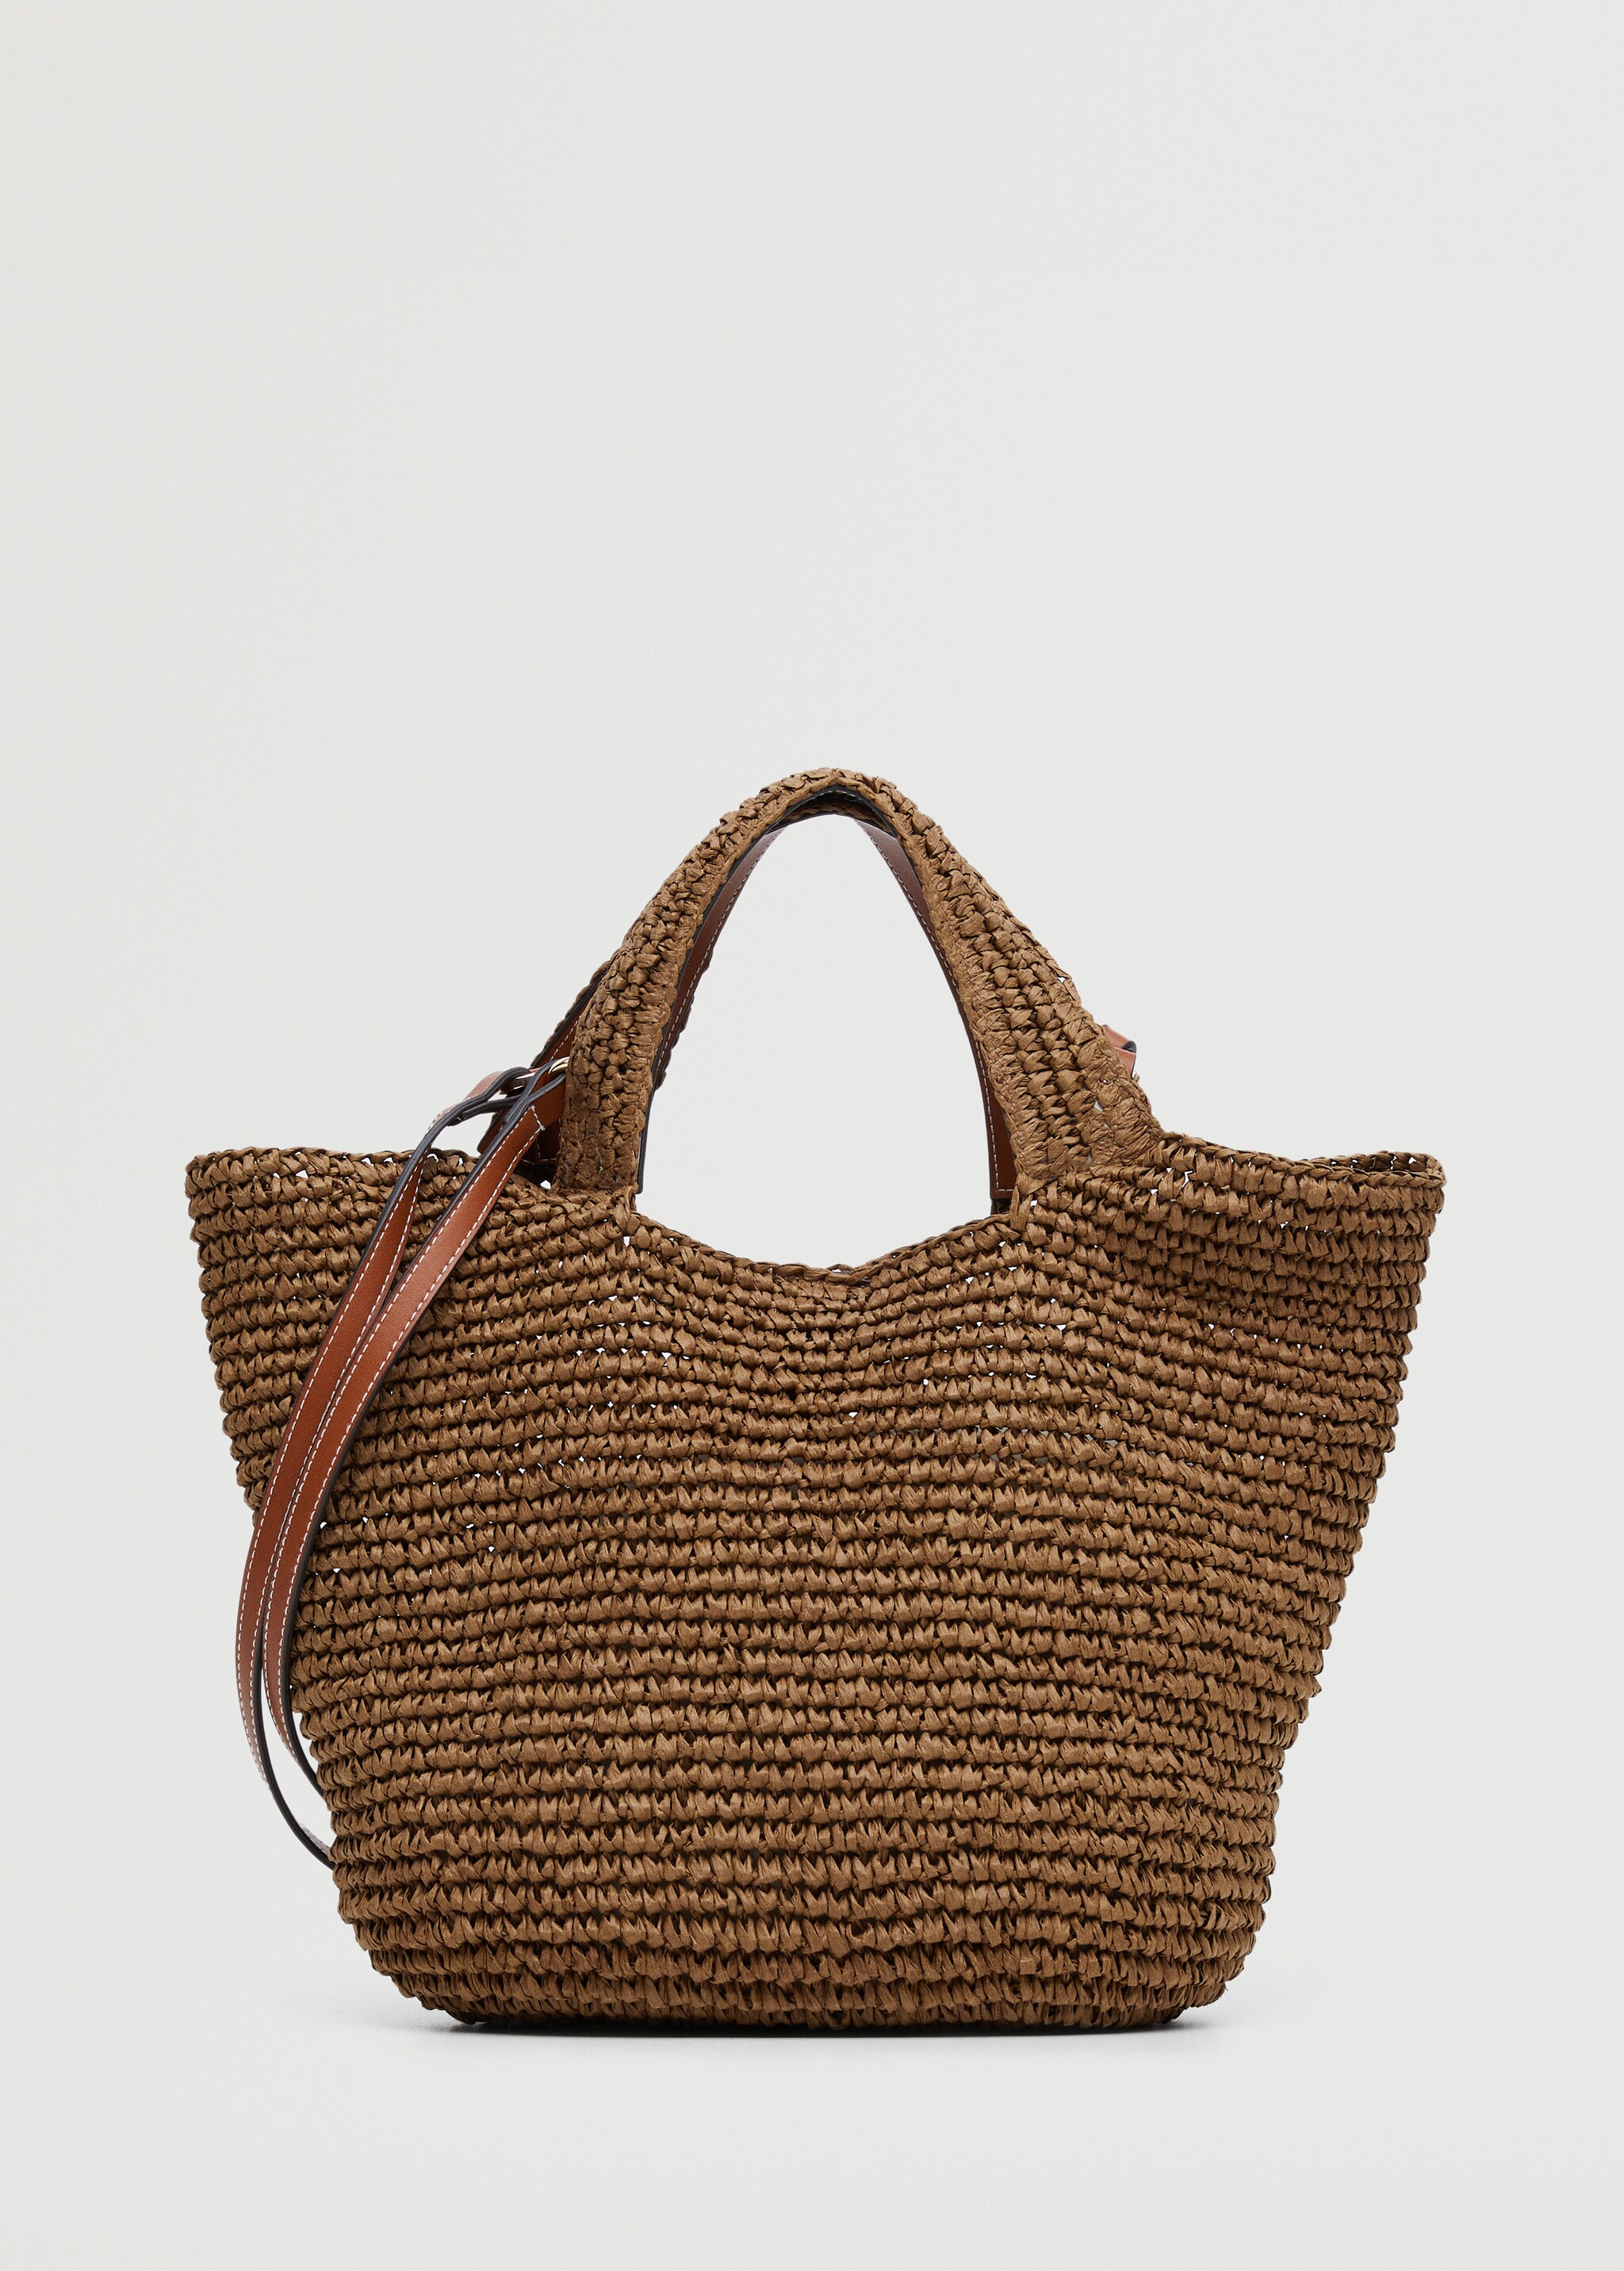 Braided shopper bag - Article without model